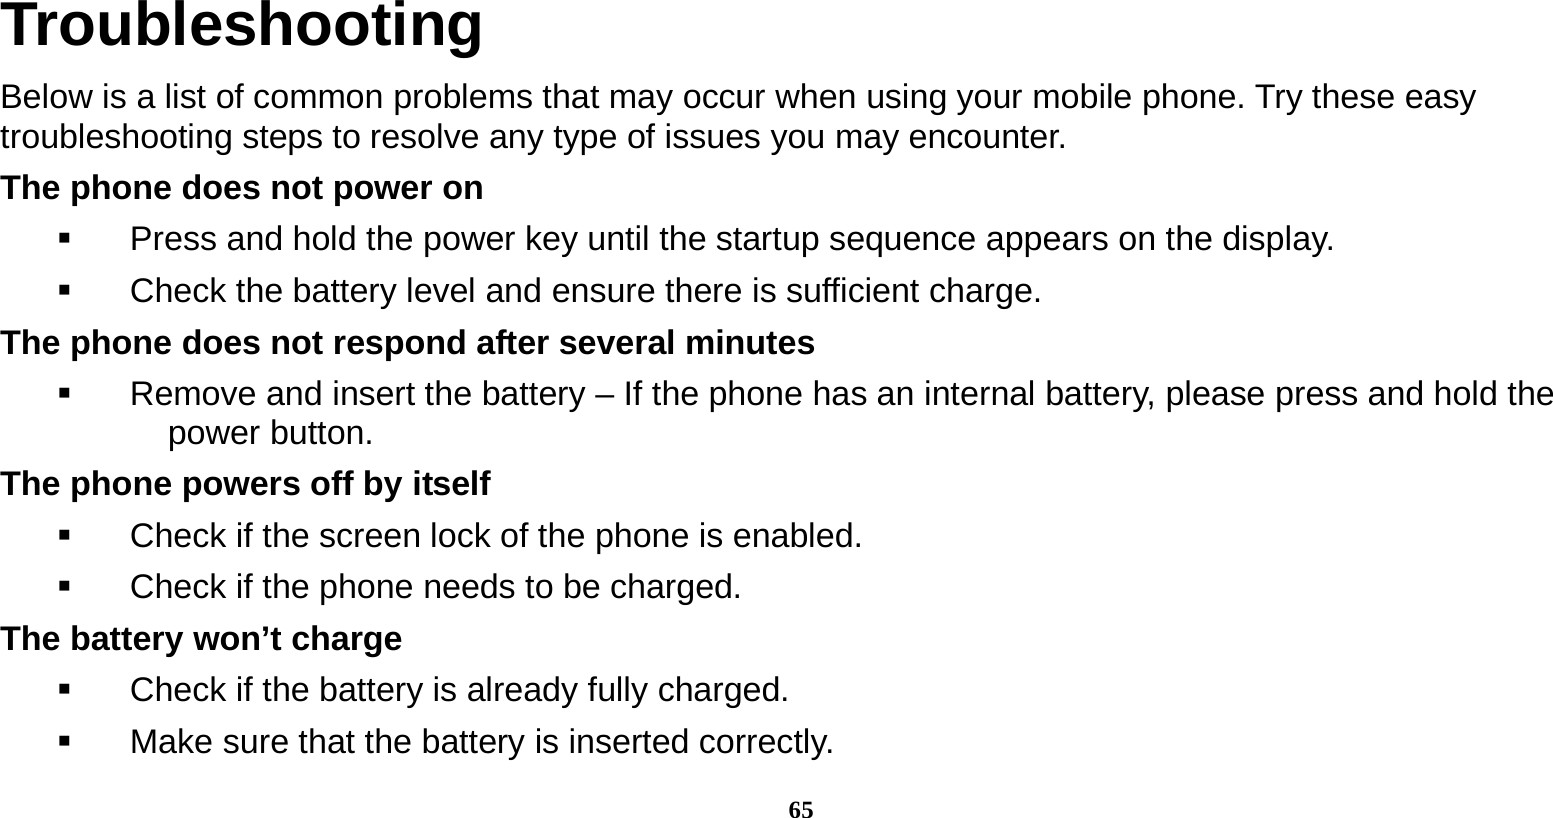  65  Troubleshooting Below is a list of common problems that may occur when using your mobile phone. Try these easy troubleshooting steps to resolve any type of issues you may encounter.   The phone does not power on   Press and hold the power key until the startup sequence appears on the display.   Check the battery level and ensure there is sufficient charge. The phone does not respond after several minutes   Remove and insert the battery – If the phone has an internal battery, please press and hold the power button. The phone powers off by itself   Check if the screen lock of the phone is enabled.   Check if the phone needs to be charged. The battery won’t charge   Check if the battery is already fully charged.   Make sure that the battery is inserted correctly.   